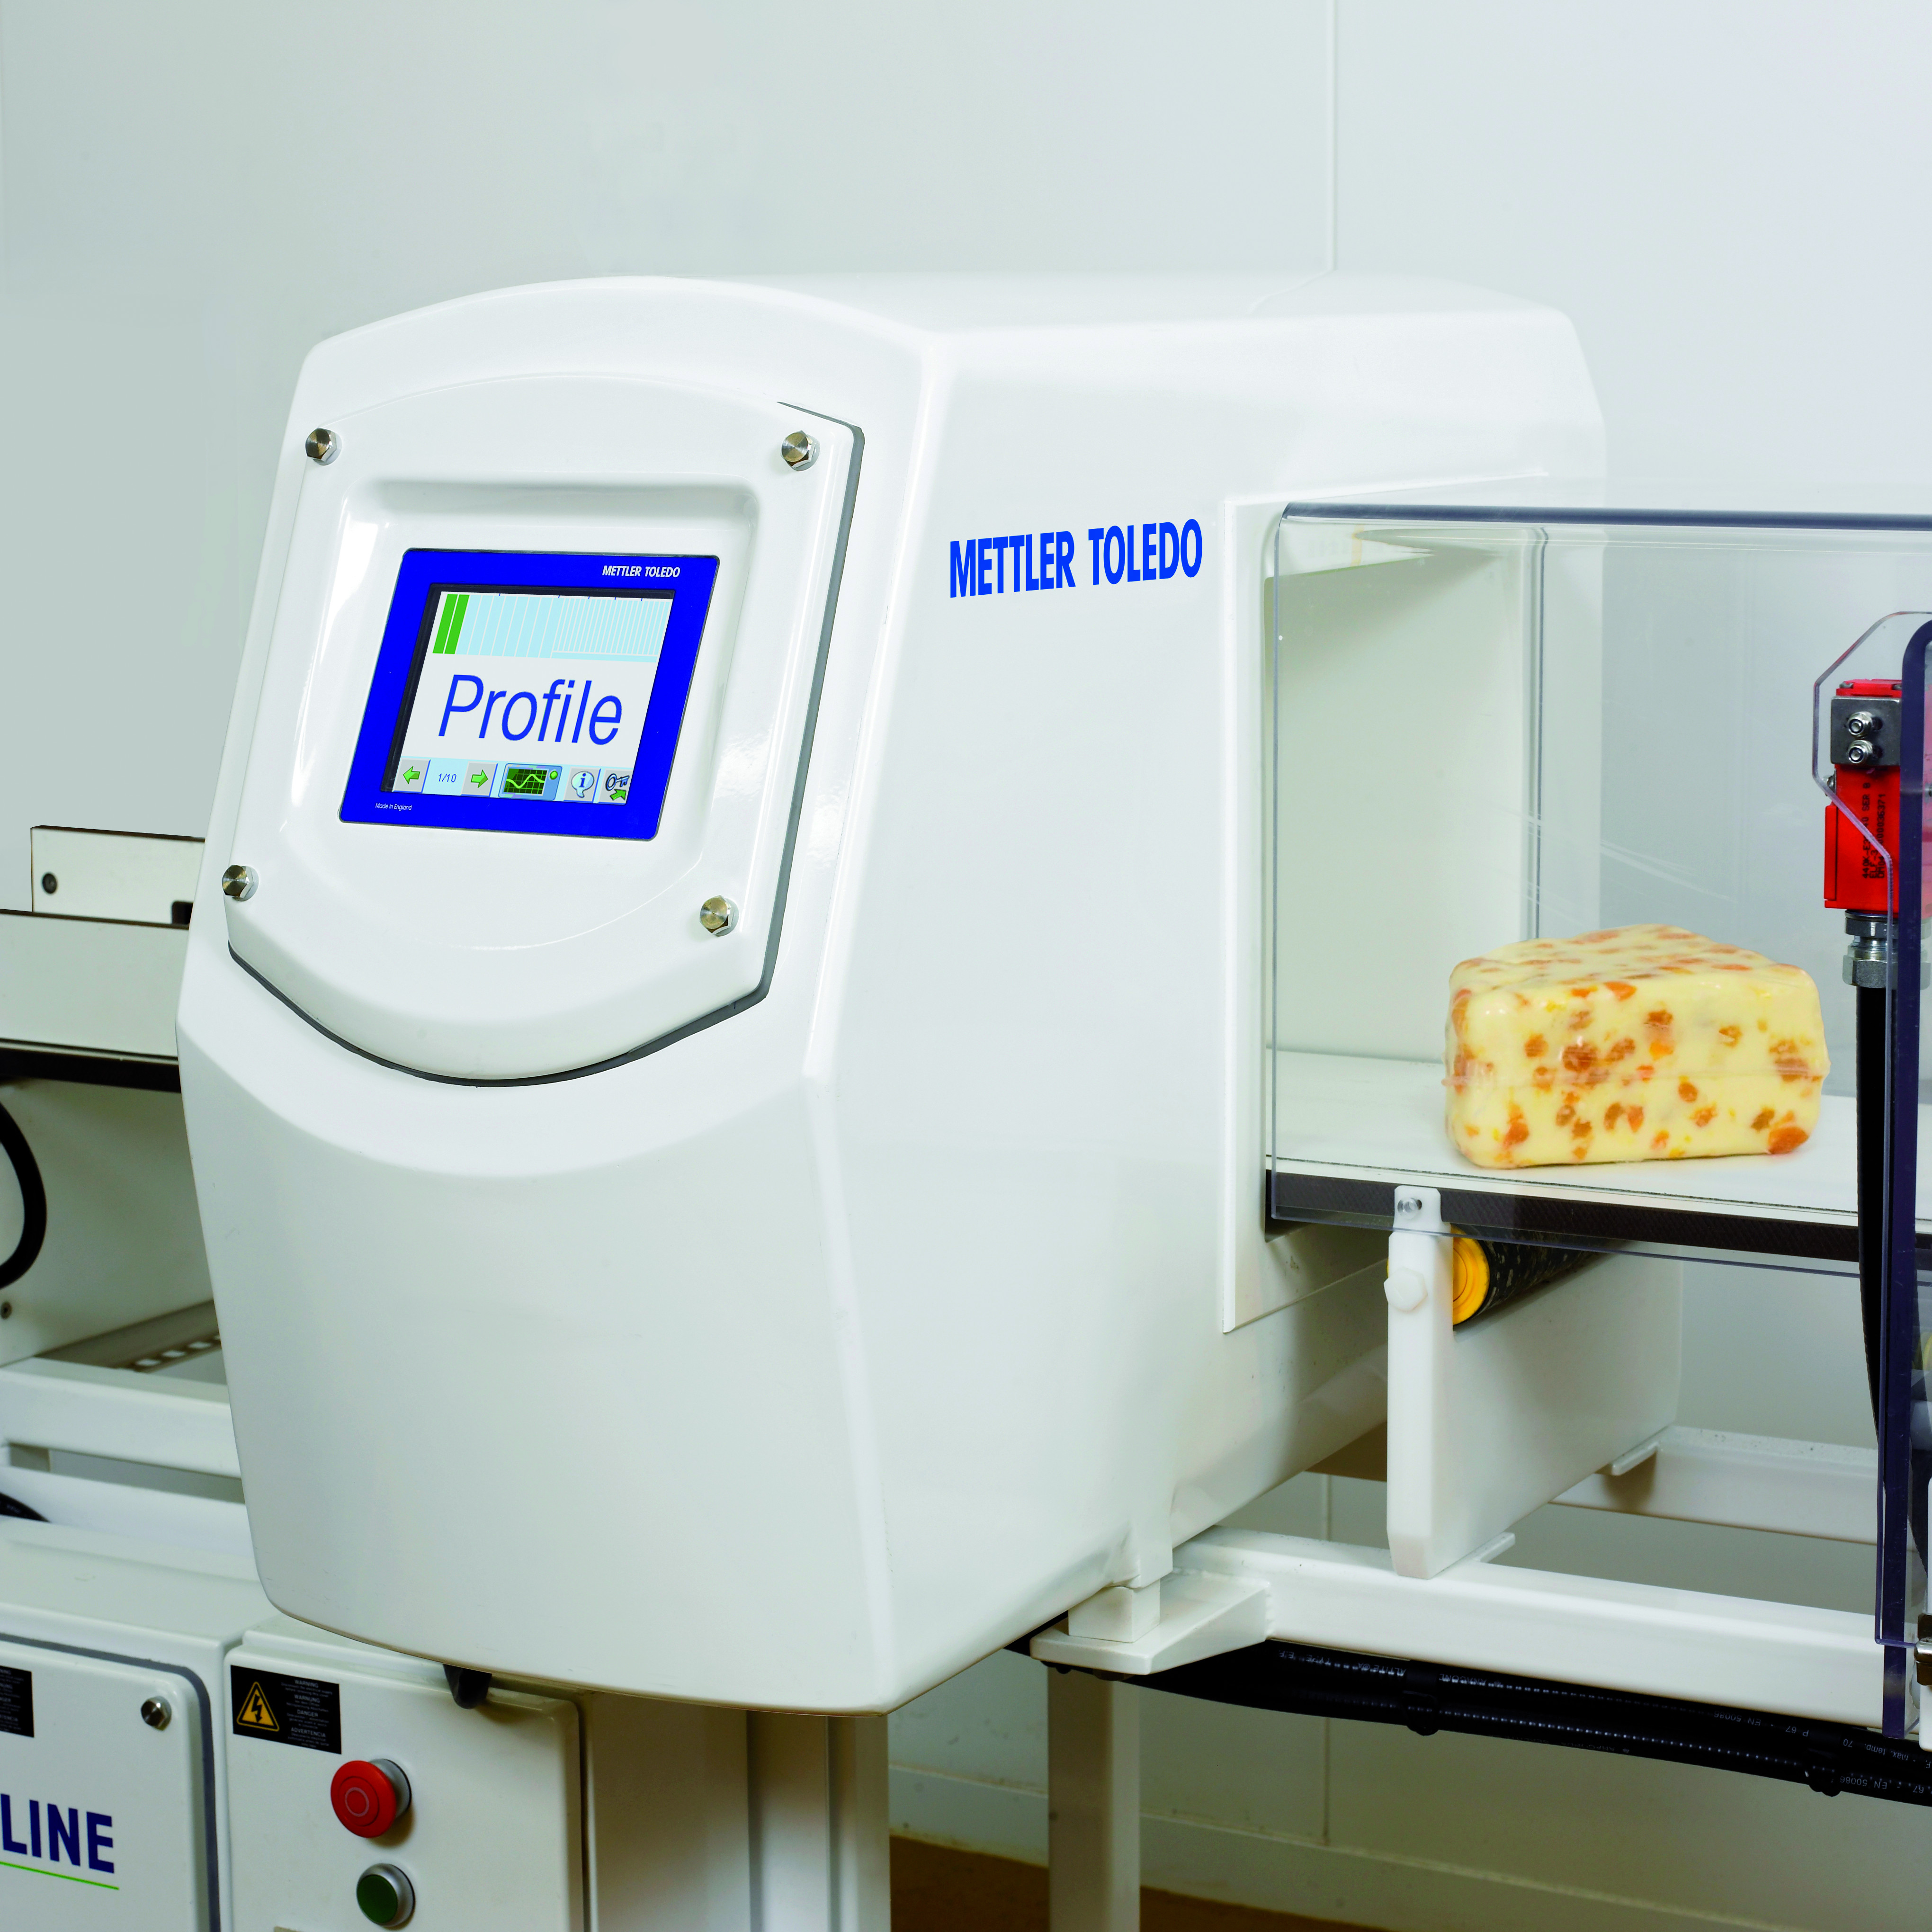 Obtain Guidance on Metal Detection’s Role in Food Safety